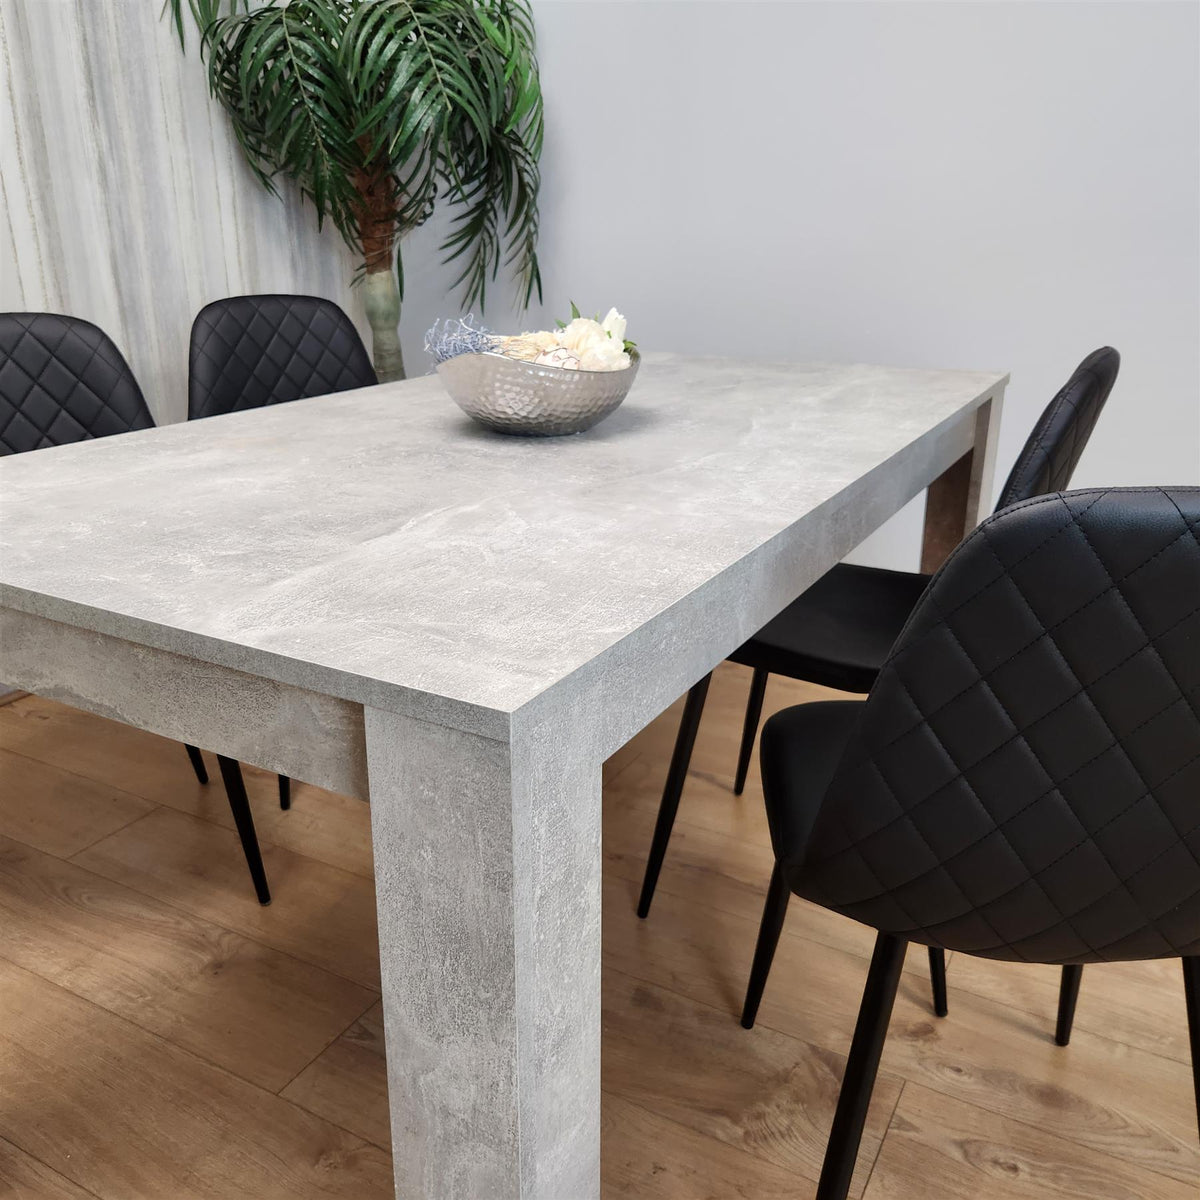 Dining Table and 4 Chairs Stone Grey Effect Wood Table 4 Black Leather Chairs Dining Room